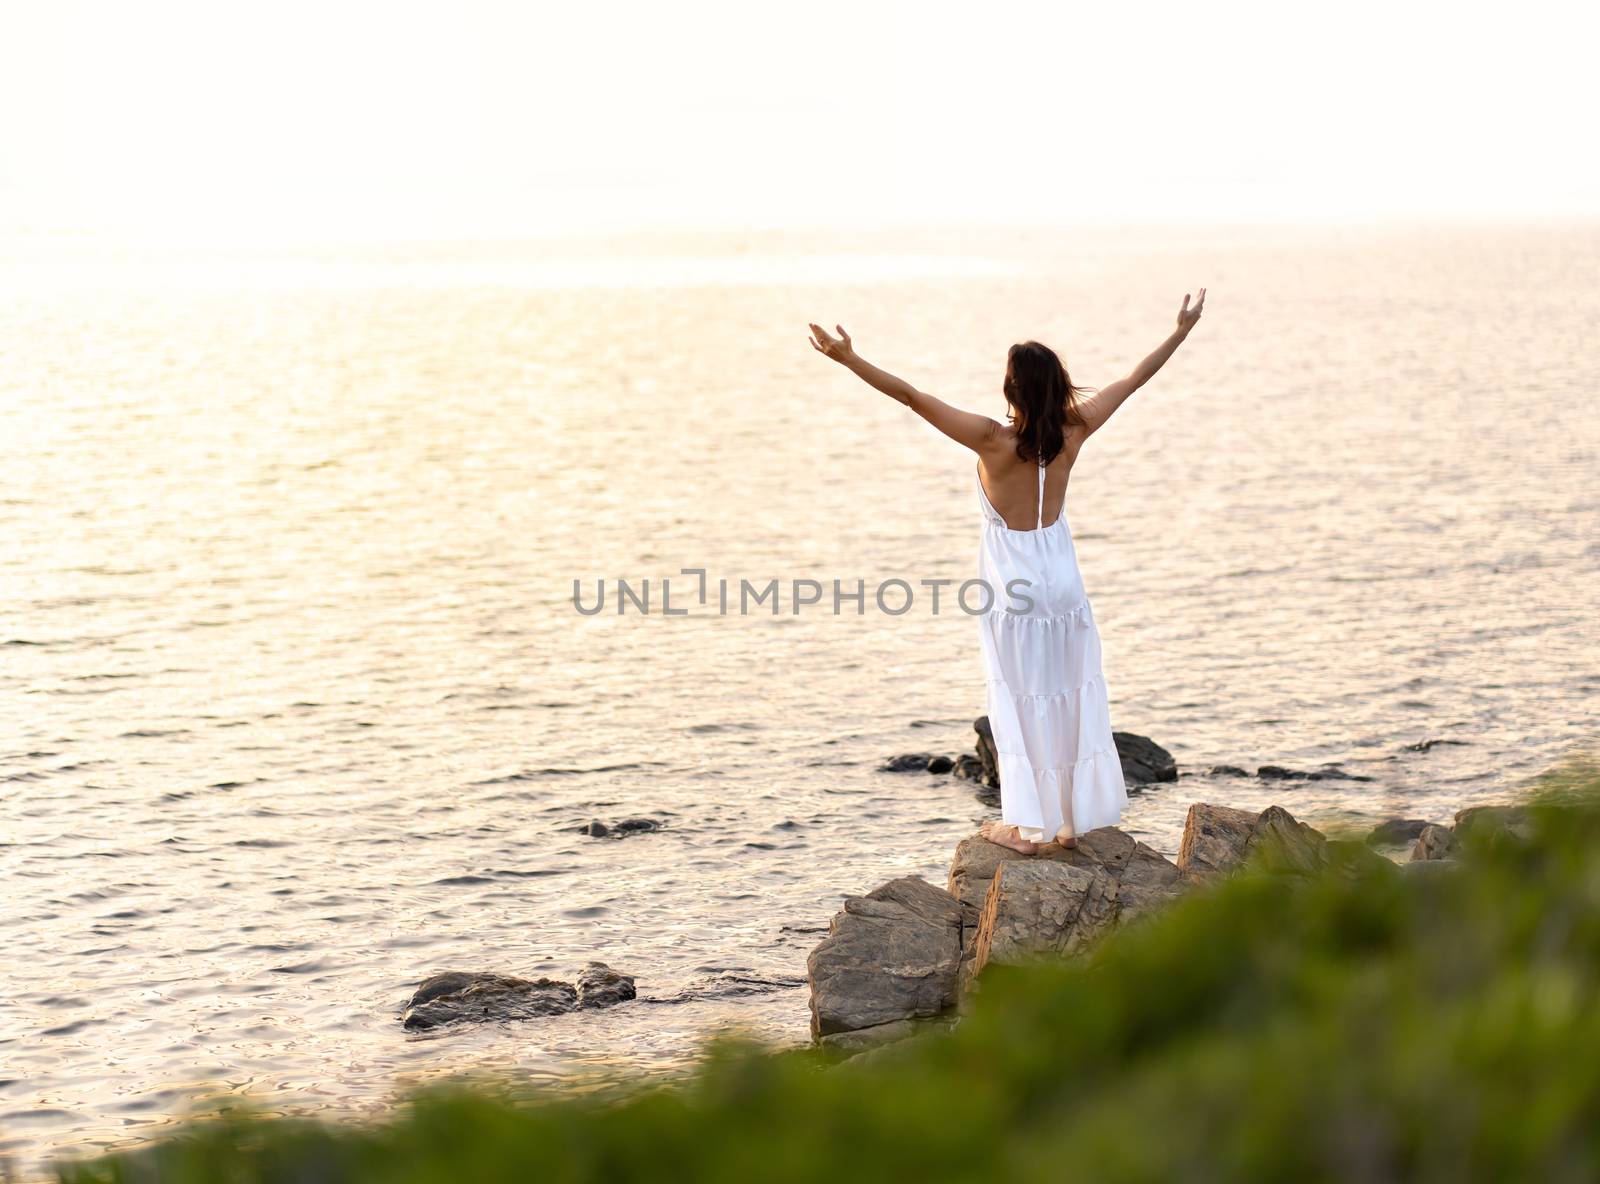 View from back of an unrecognizable woman with white long dress and open arms upwards looking at the setting sun - Alone female person with barefoot on sea rocks embracing nature as a sign of devotion